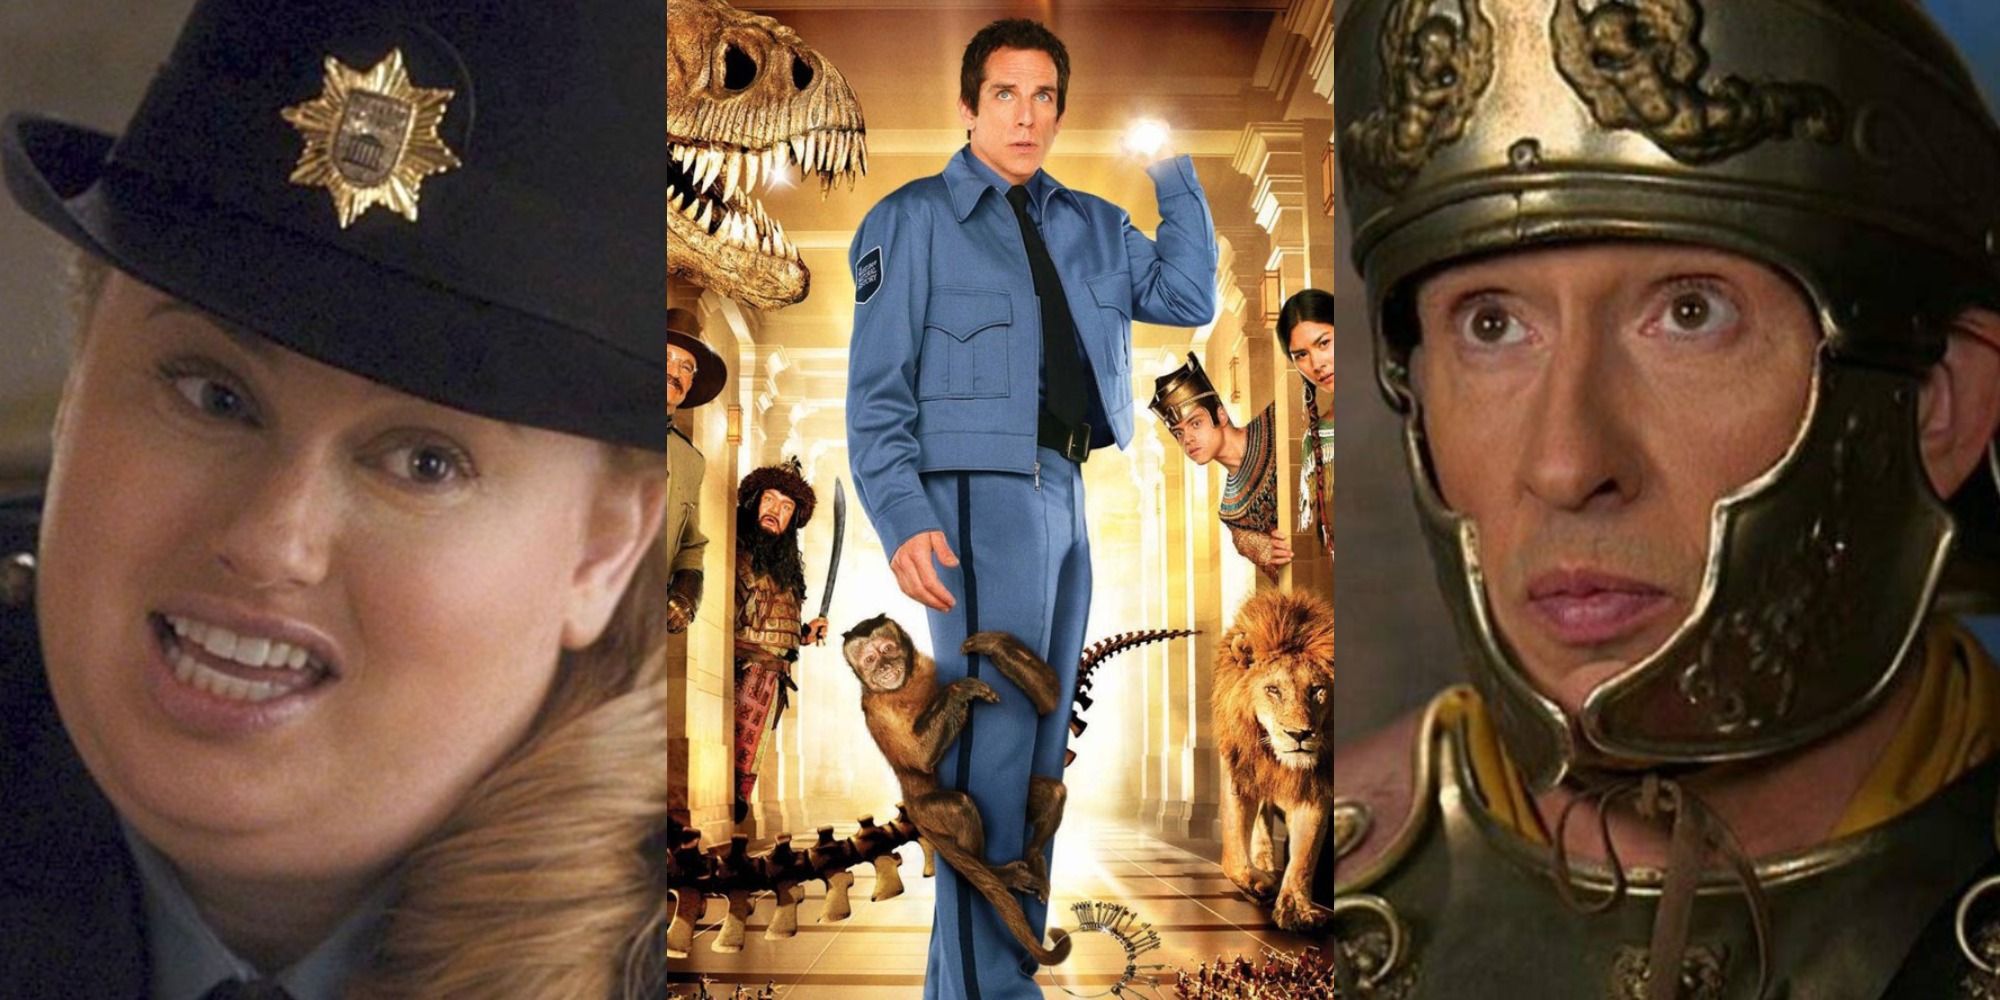 The poster for Night at the Museum flanked by images of Rebel Wilson and Steve Coogan from the movies